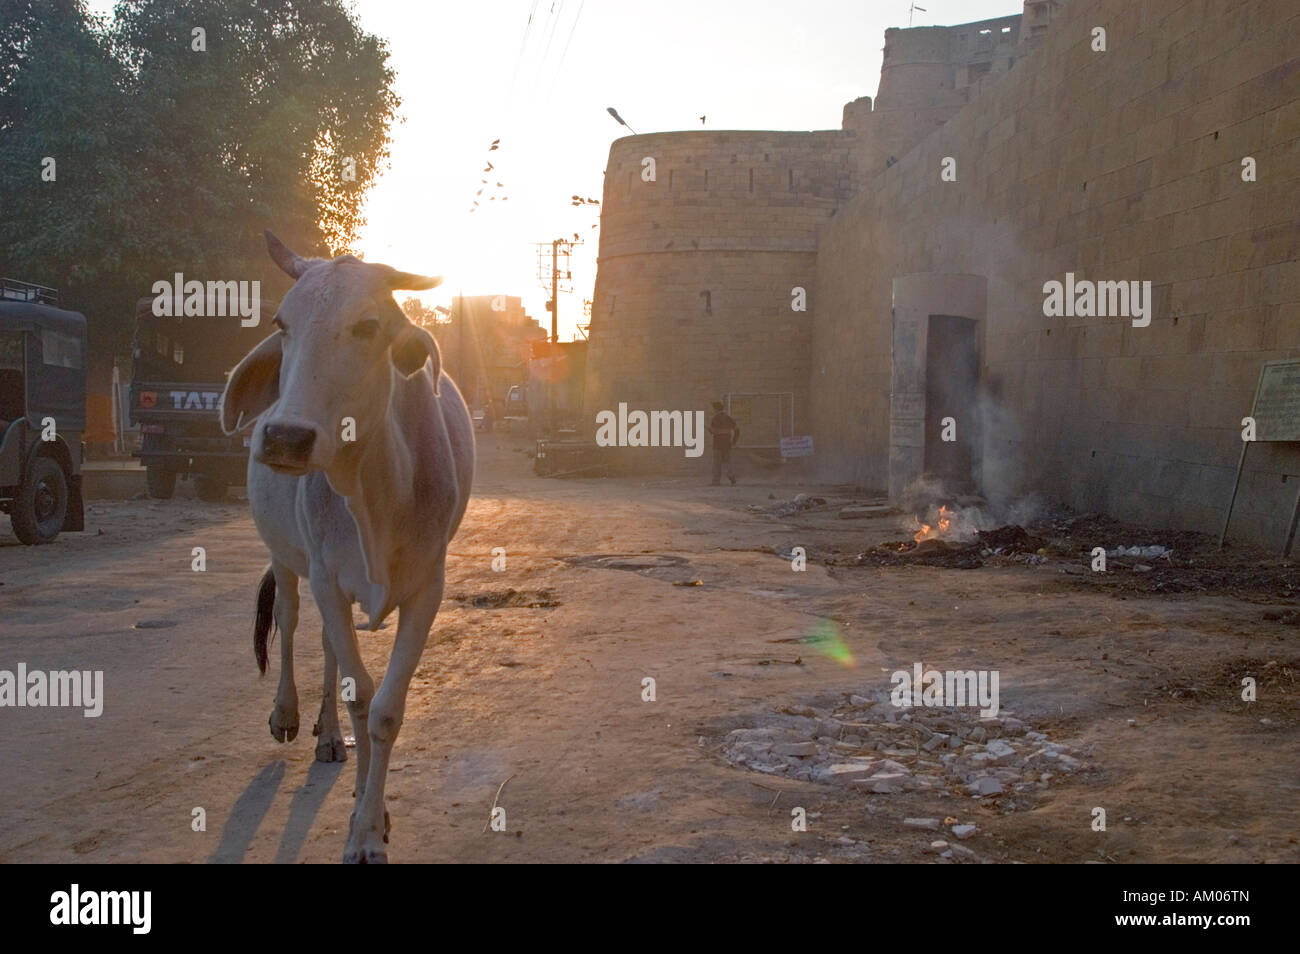 A brahmin cow at sunrise en route to Jaisalmer Fort, India. Stock Photo